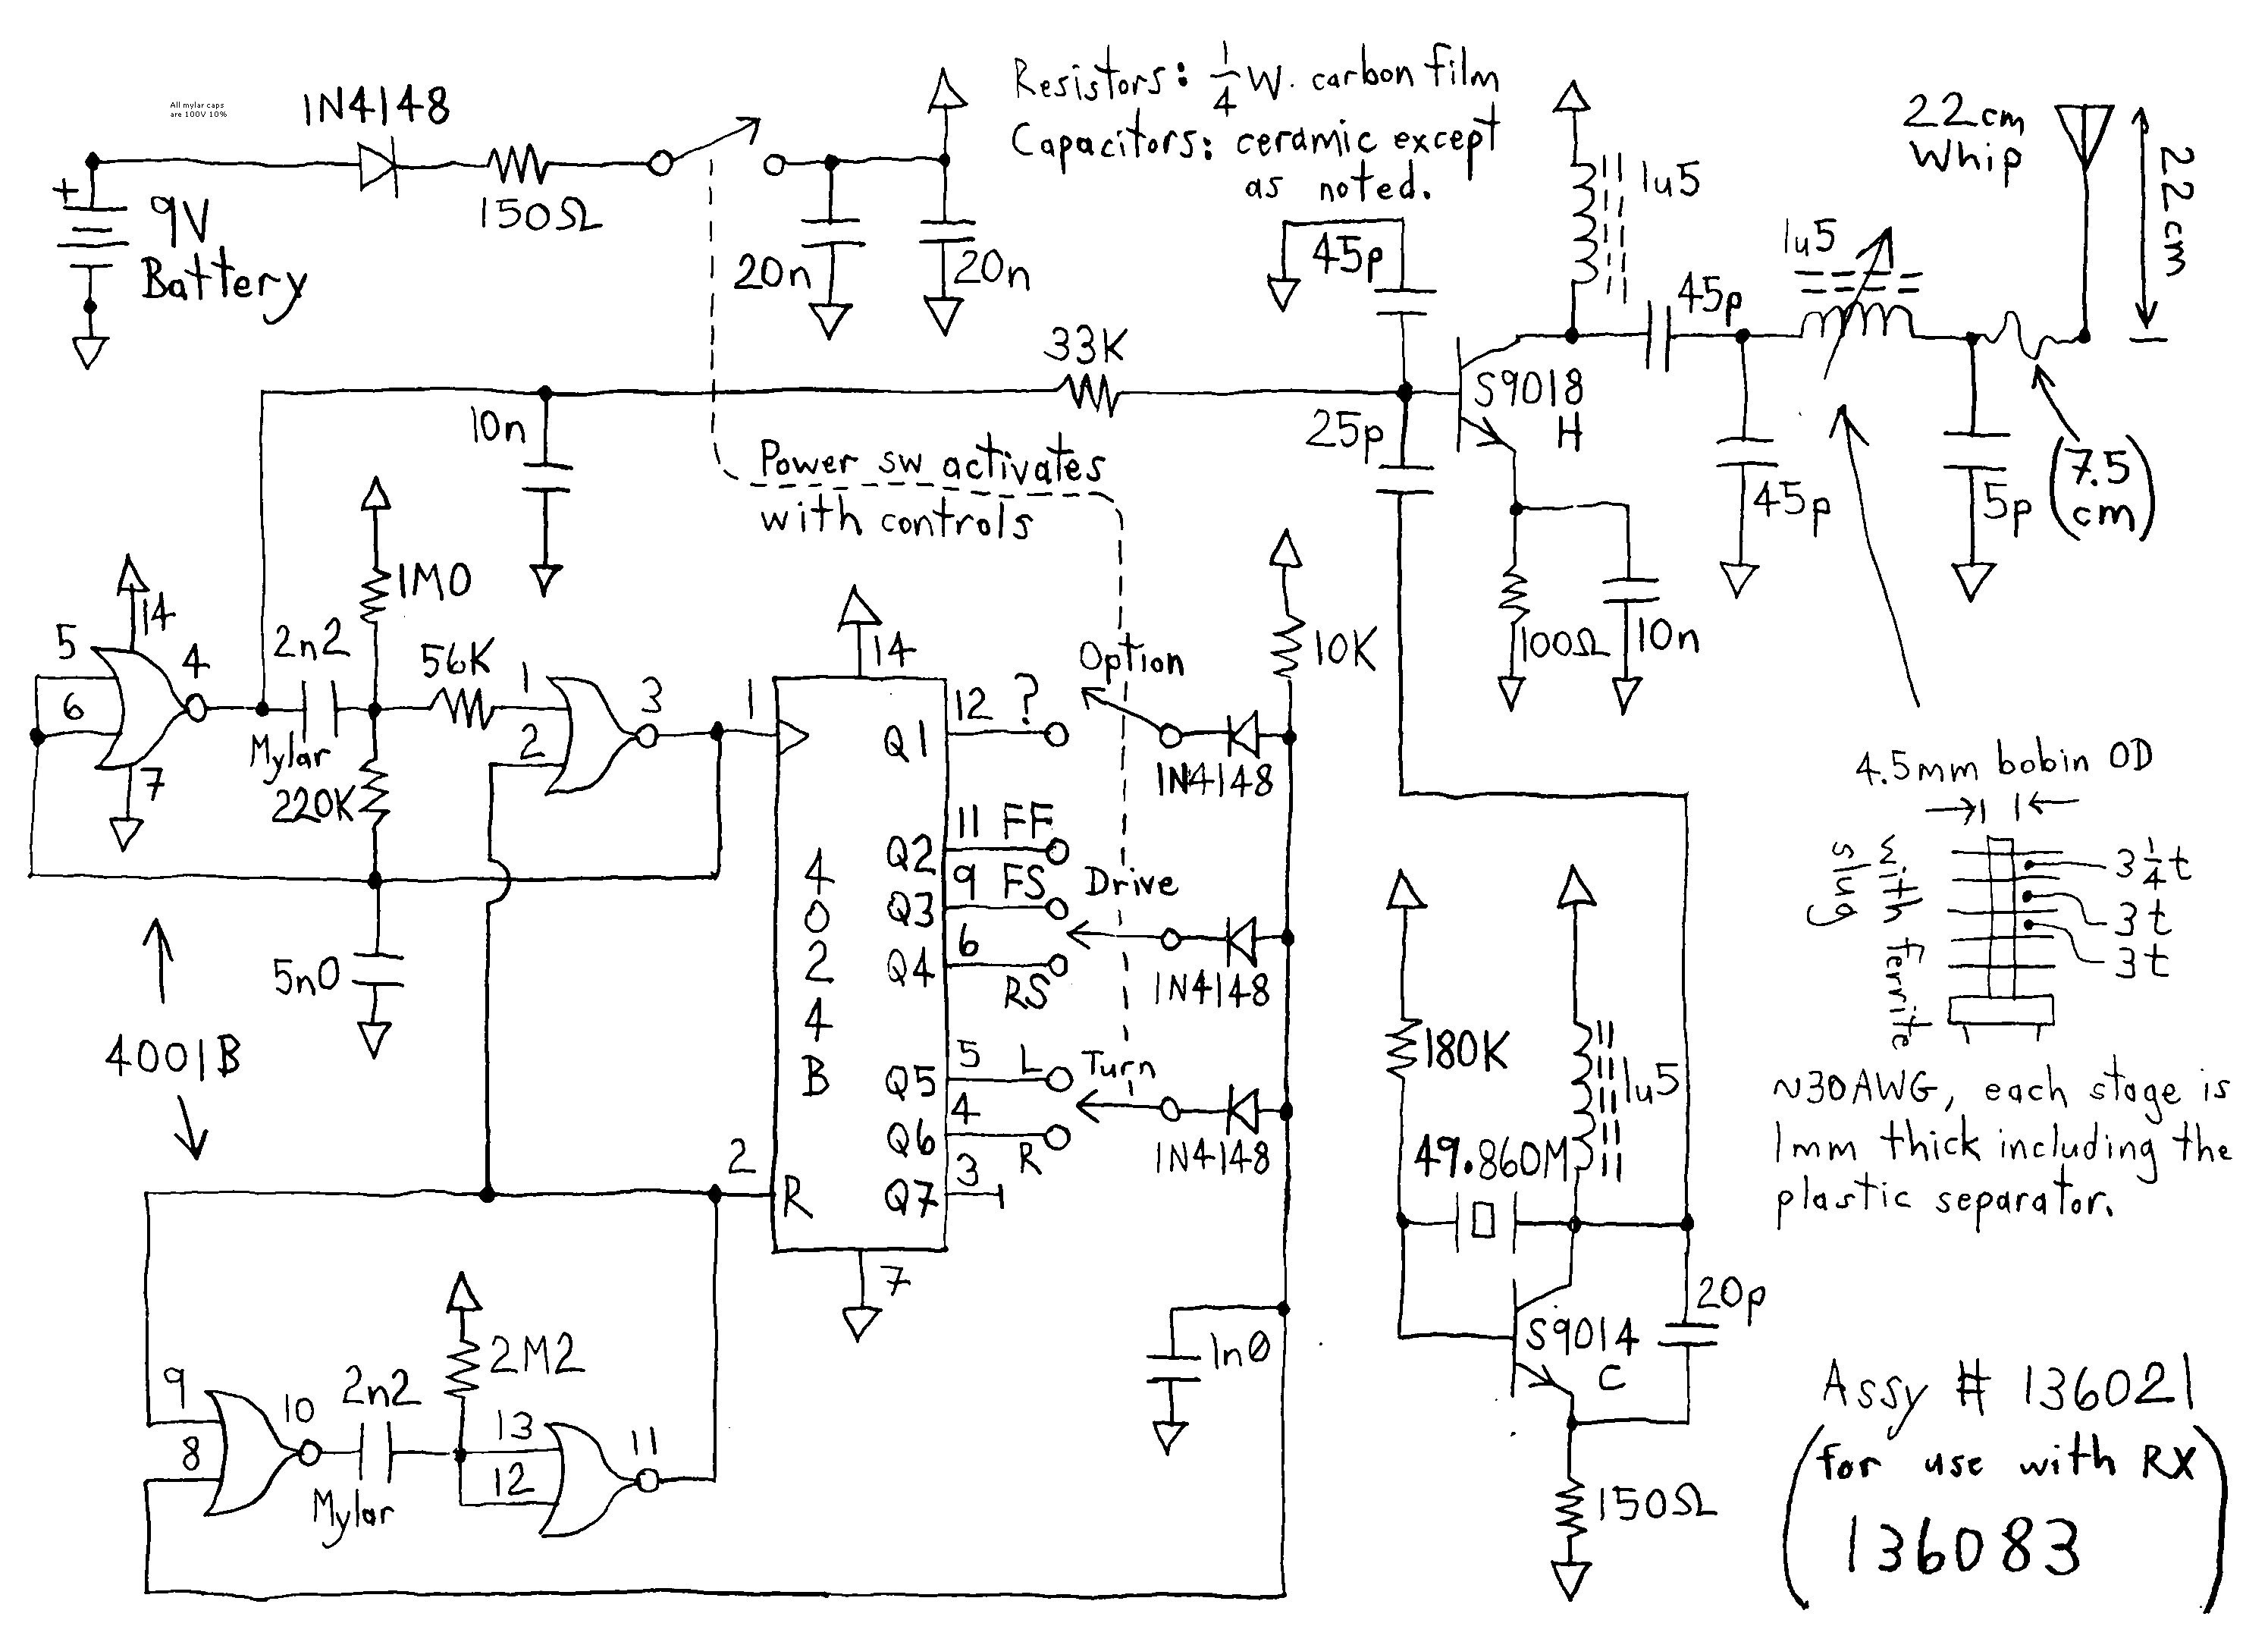 Wiring Diagram For Remote Car Starter New Unique Rc Car Wiring Diagram